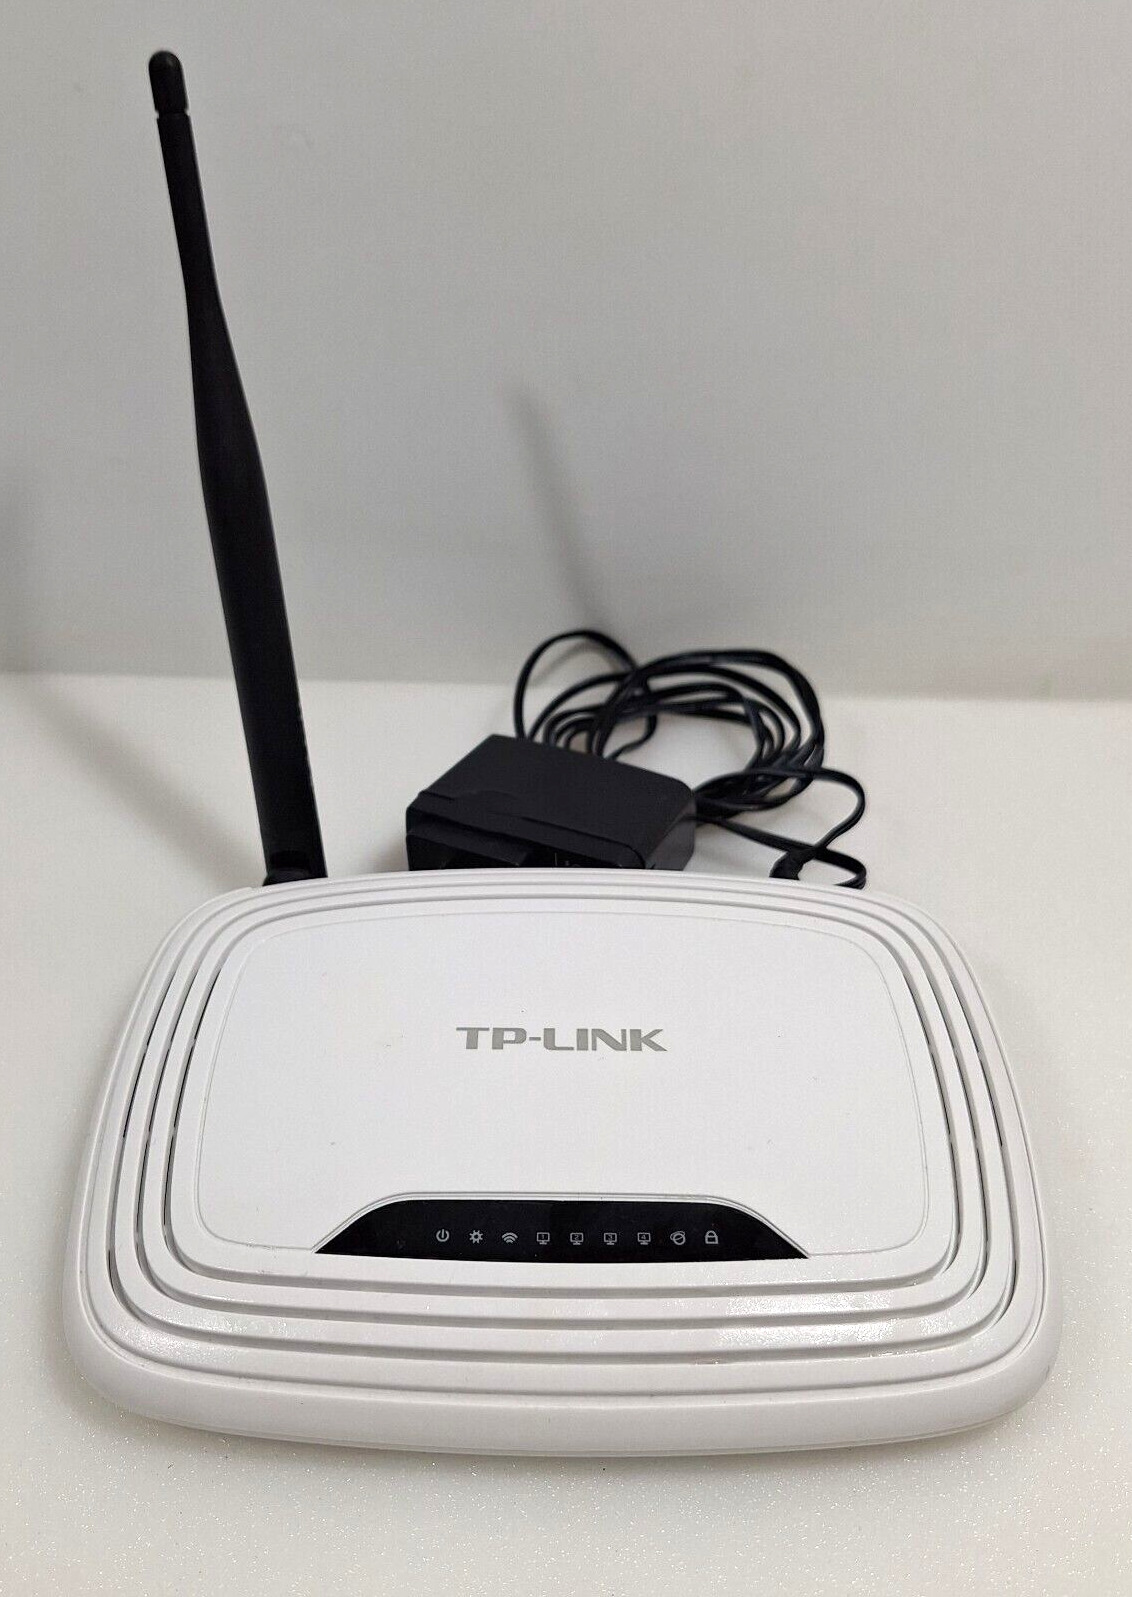 TP-Link TL-WR740N 150 Mbps 4-Port 10/100 Wireless N Router White Wifi Internet